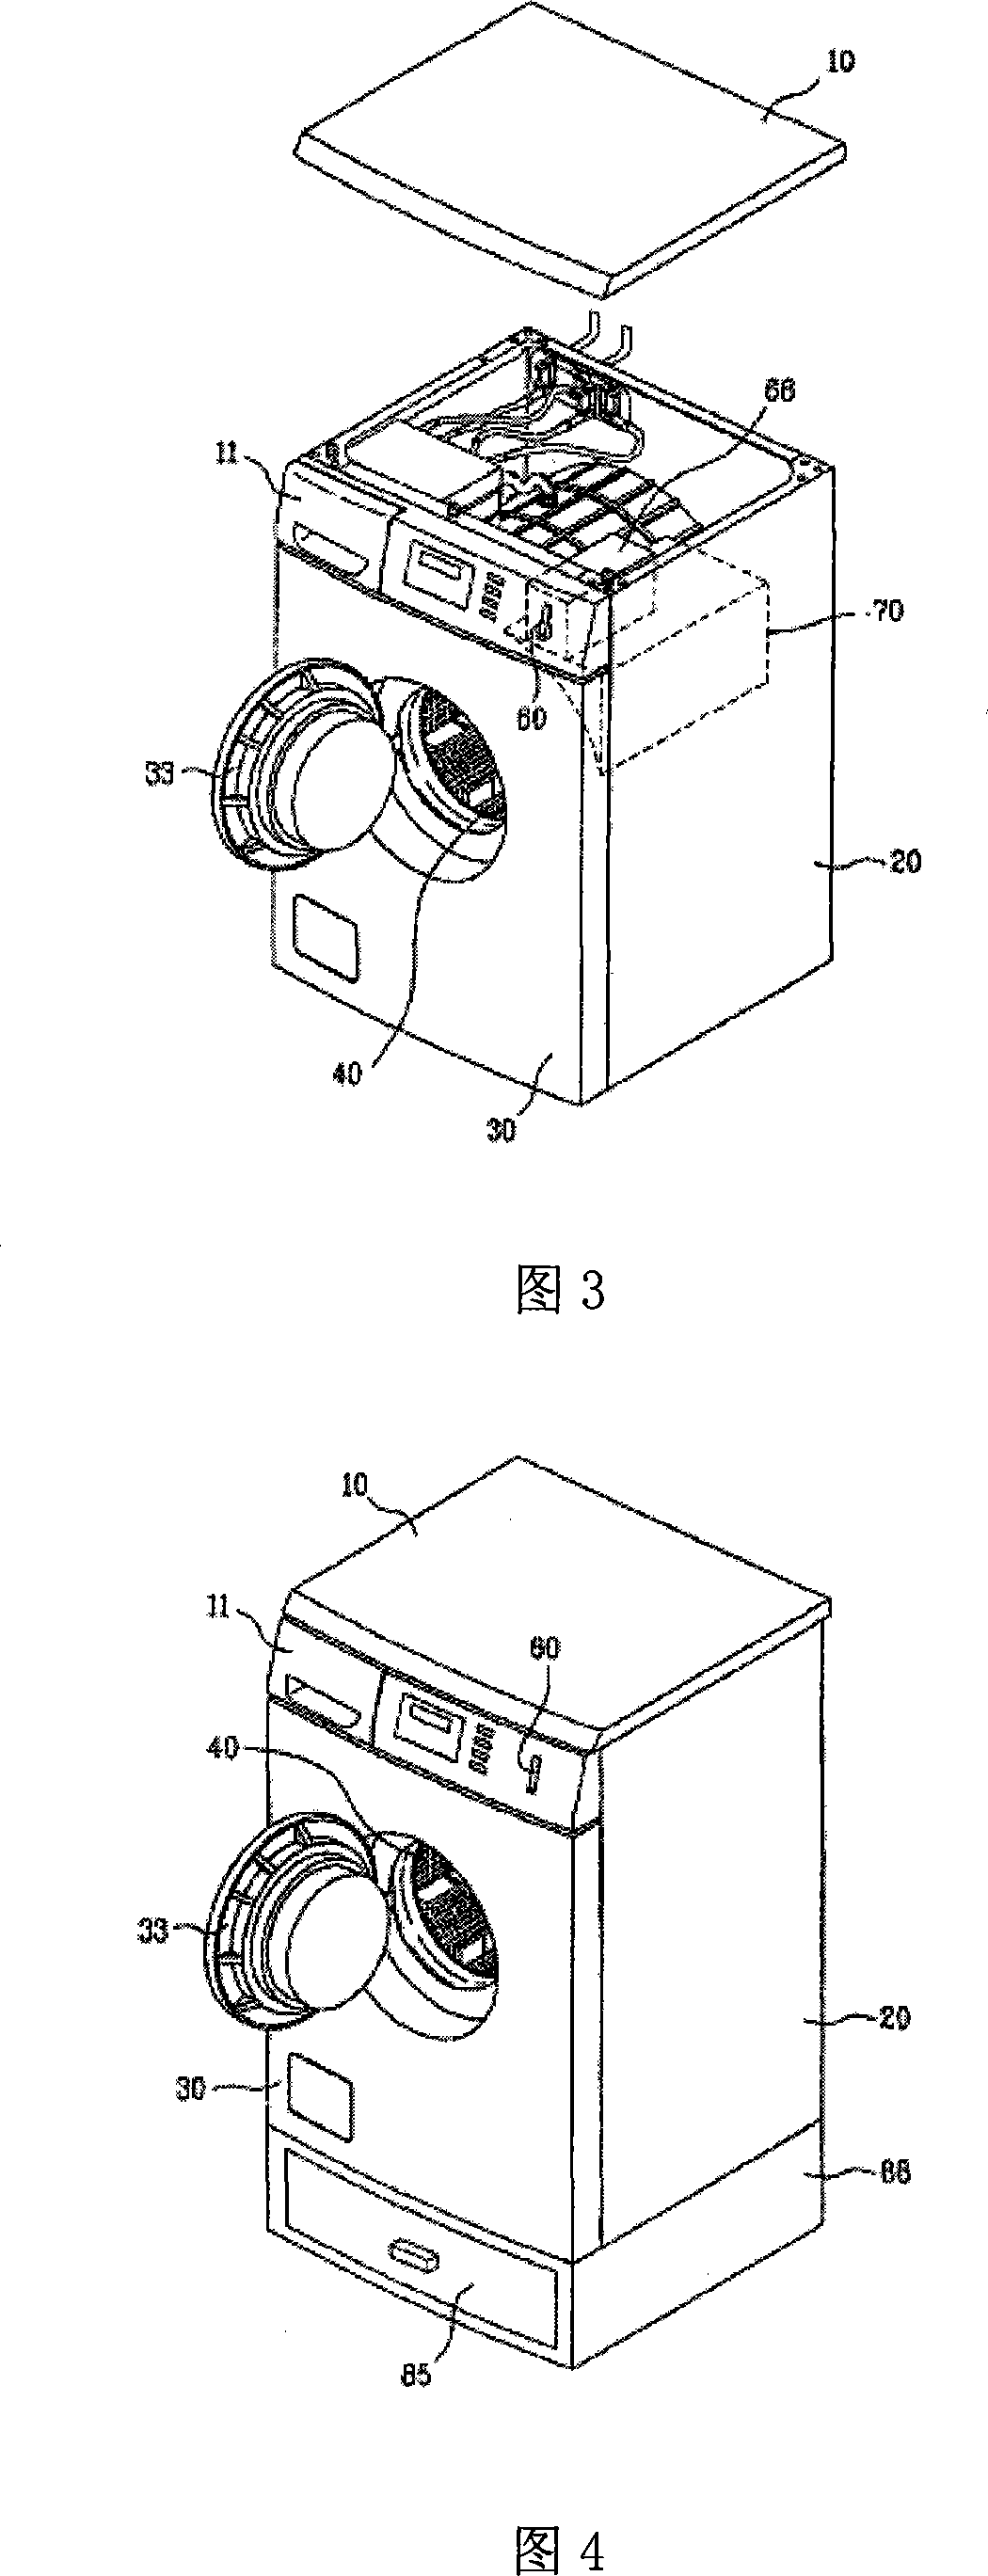 Apparatus for processing commercial clothings